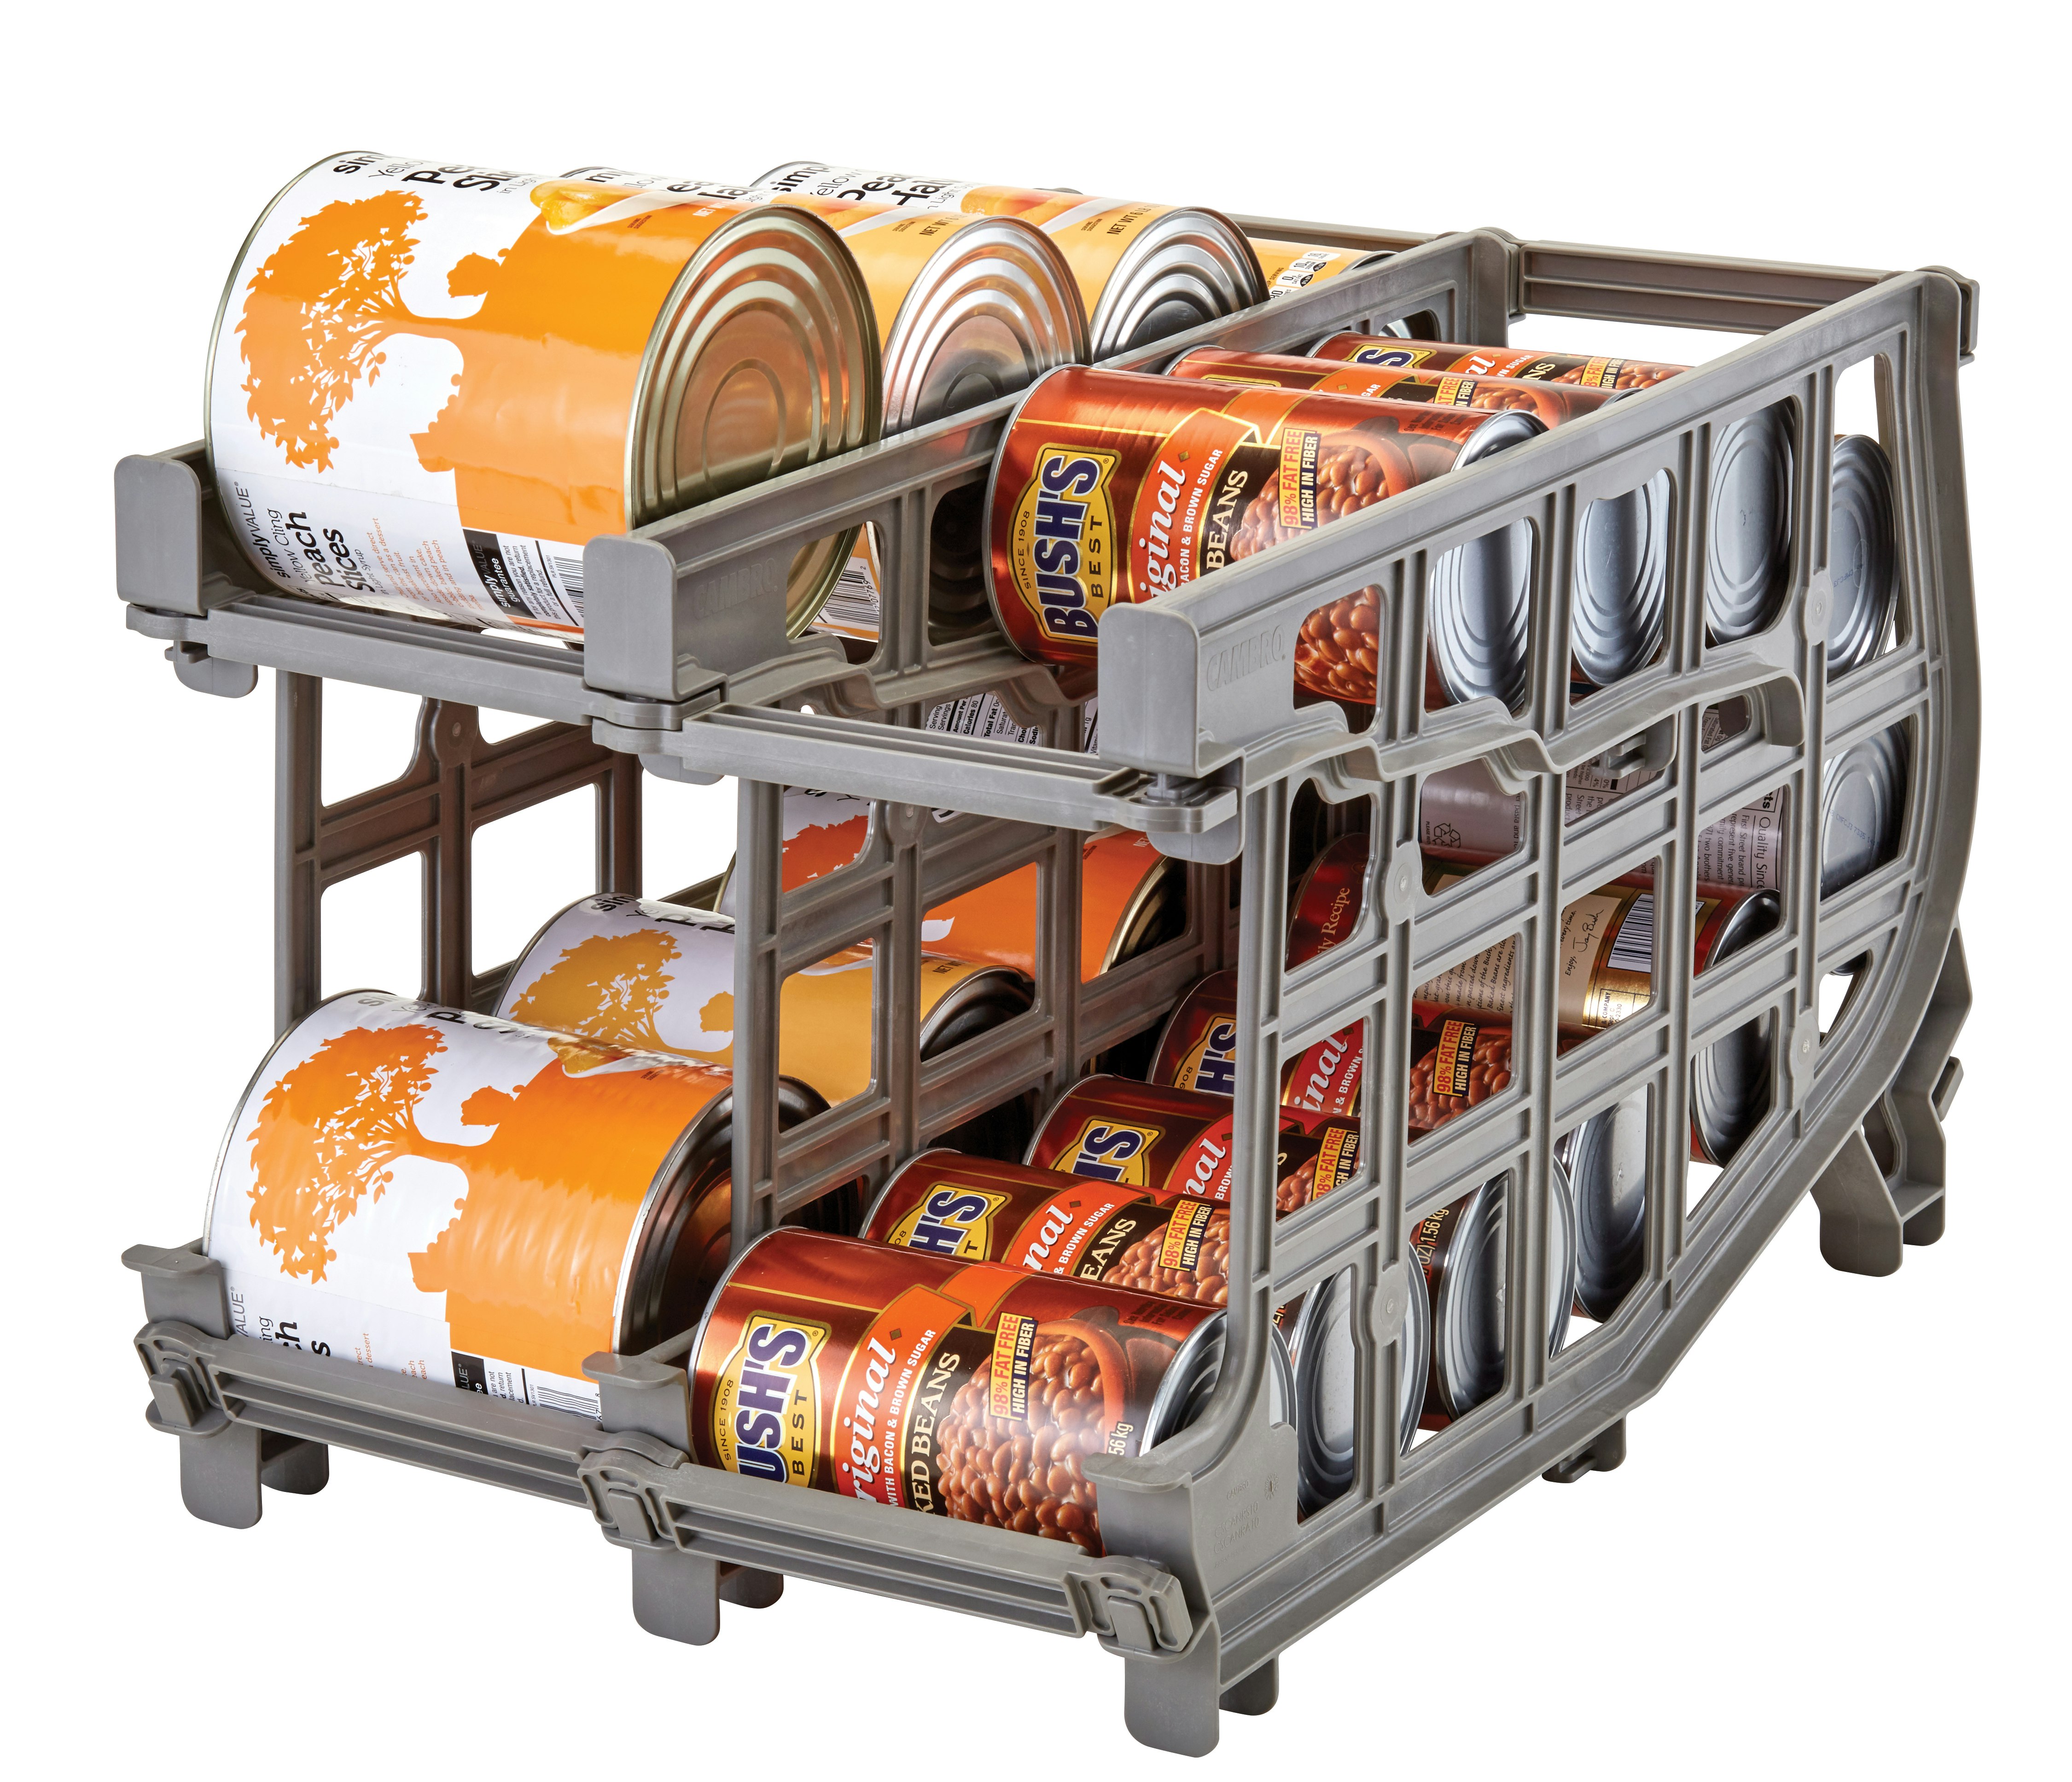 Regency CANRK162M Full Size Mobile Aluminum Can Rack for #10 and #5 Cans